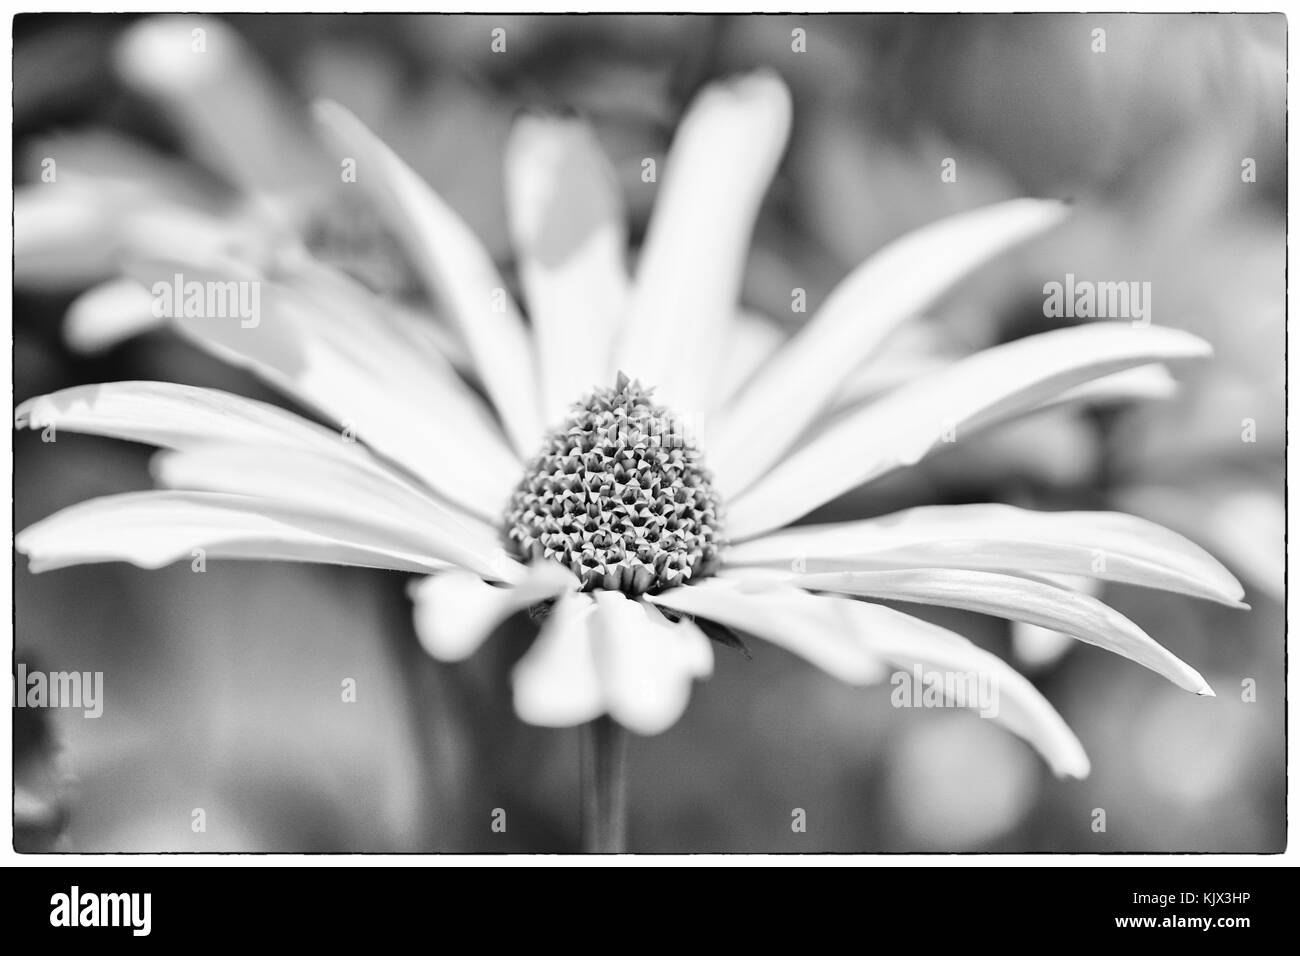 Evanescence shown by spent flowers Stock Photo